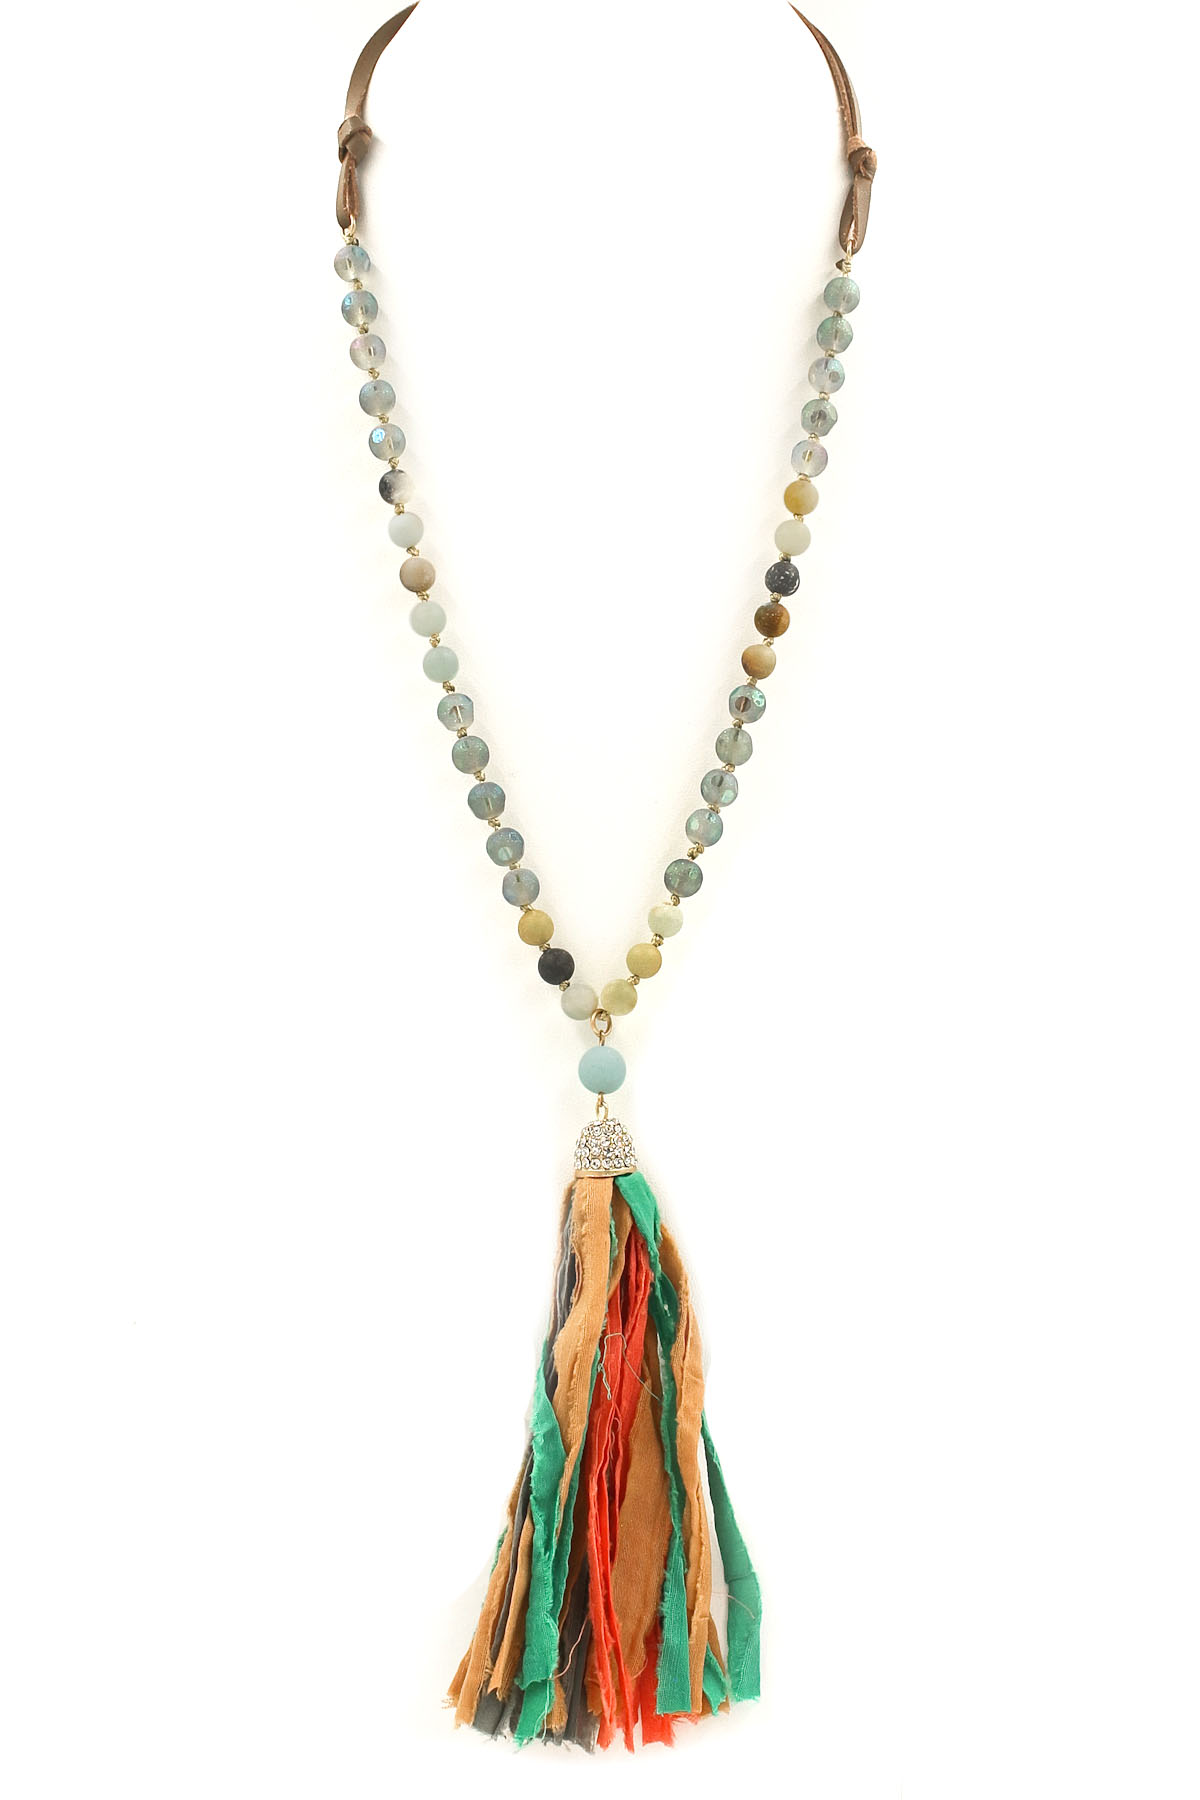 Fabric Tassel Long Necklace - Necklaces